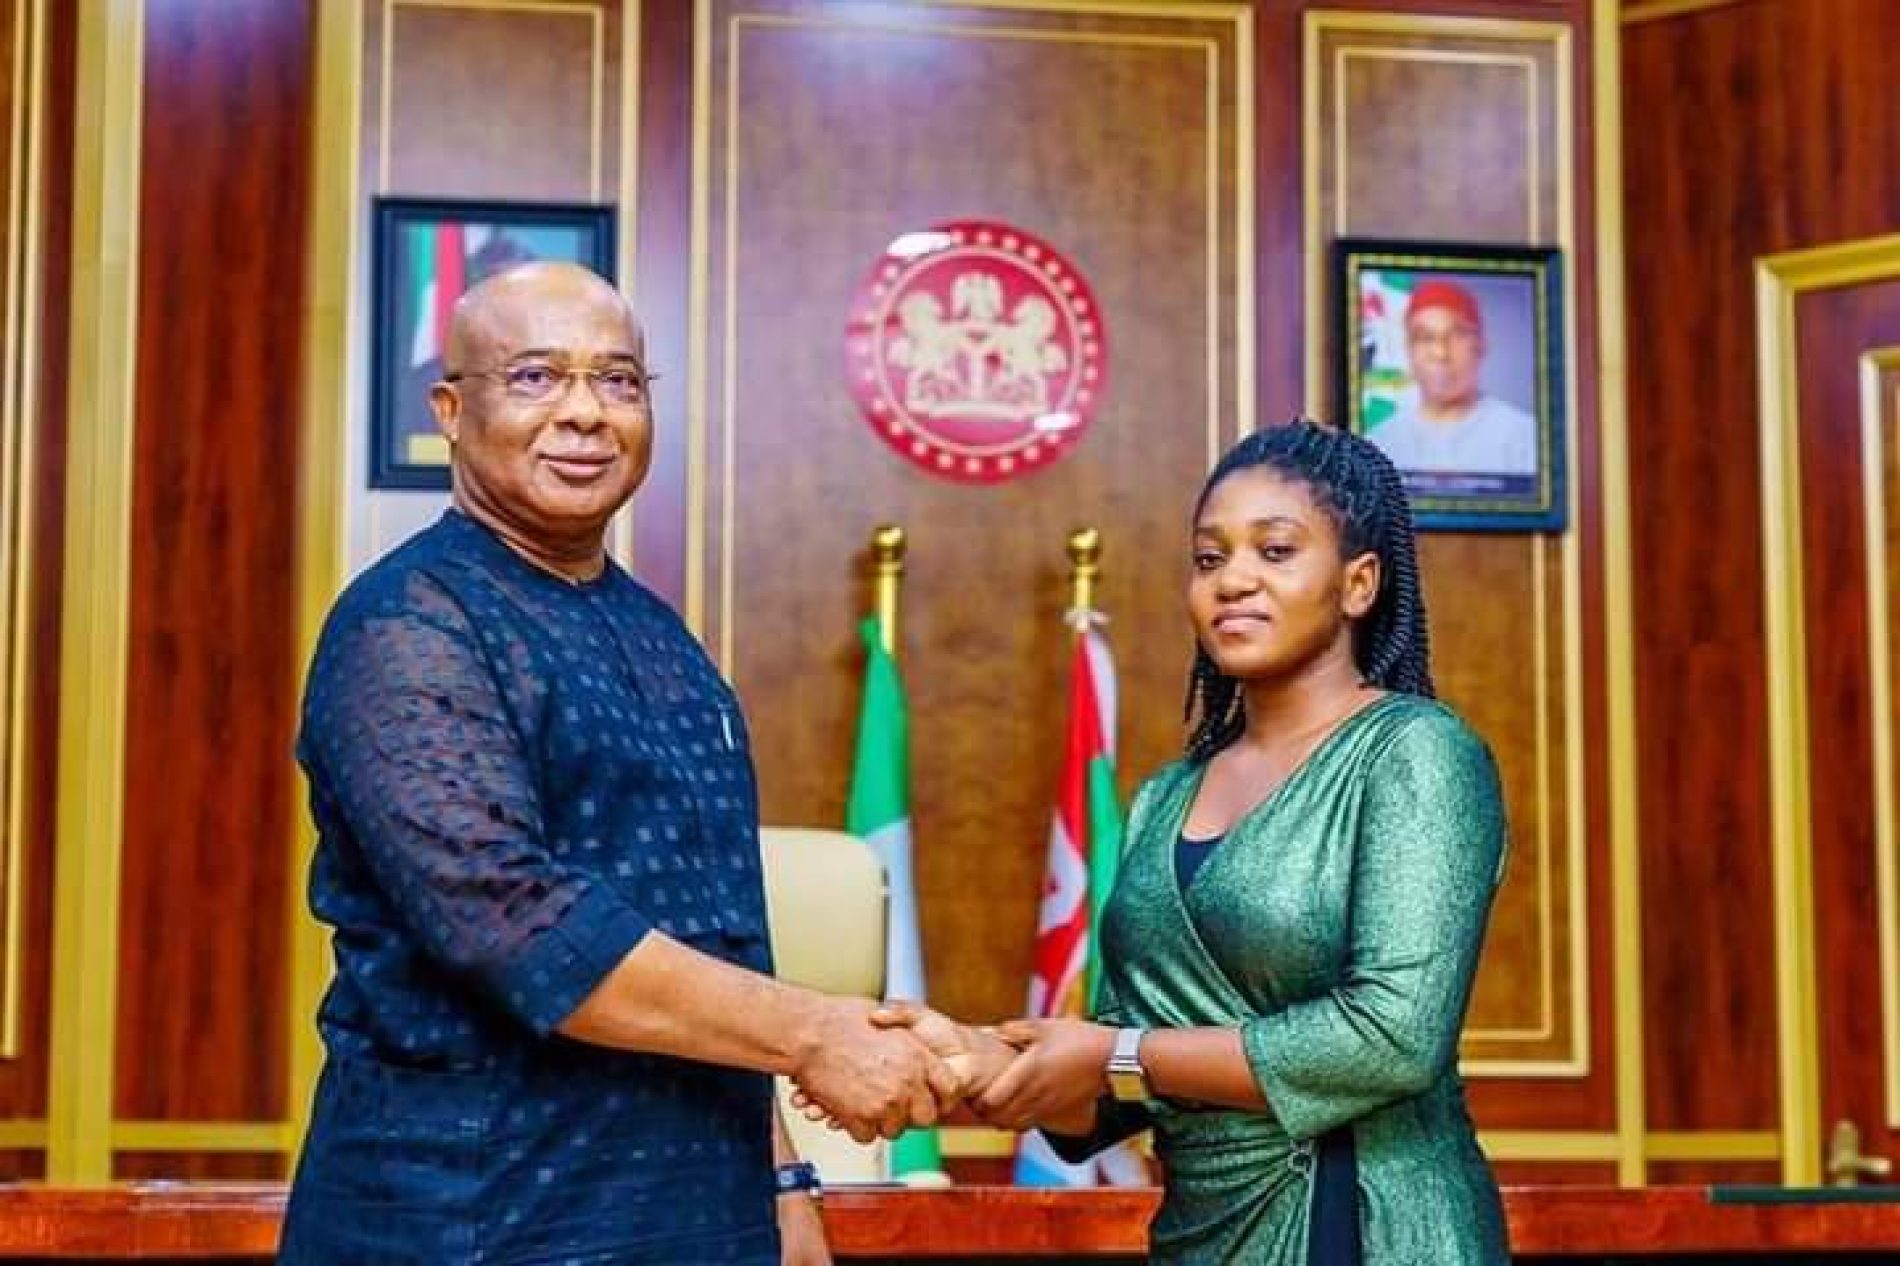 Miss Chinaza Nwozuzu Bags Scholarship From Imo Govt After Making 9As in SSCE